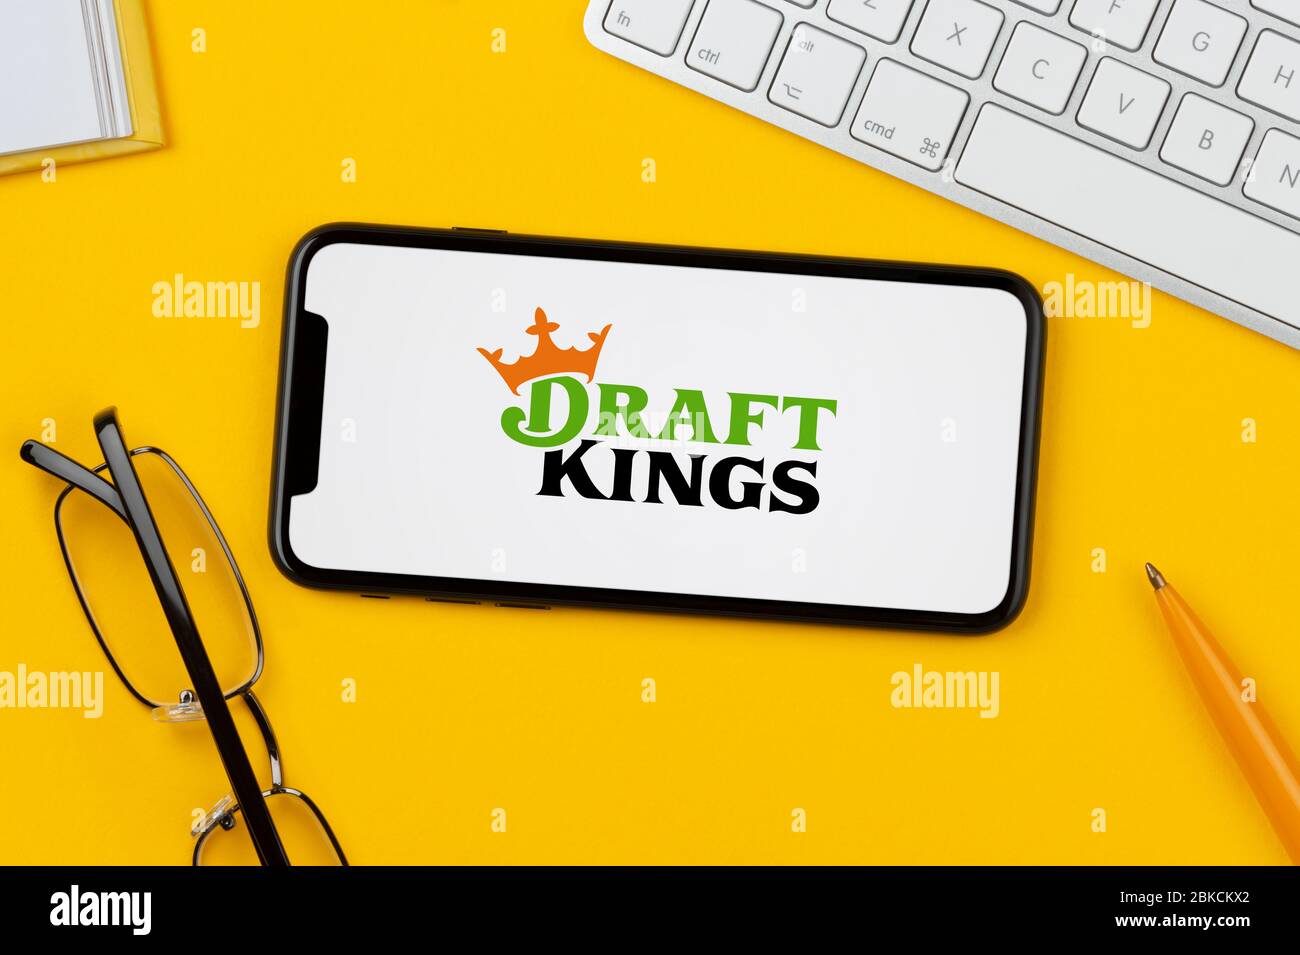 A smartphone showing the Draft Kings logo rests on a yellow background along with a keyboard, glasses, pen and book (Editorial use only). Stock Photo